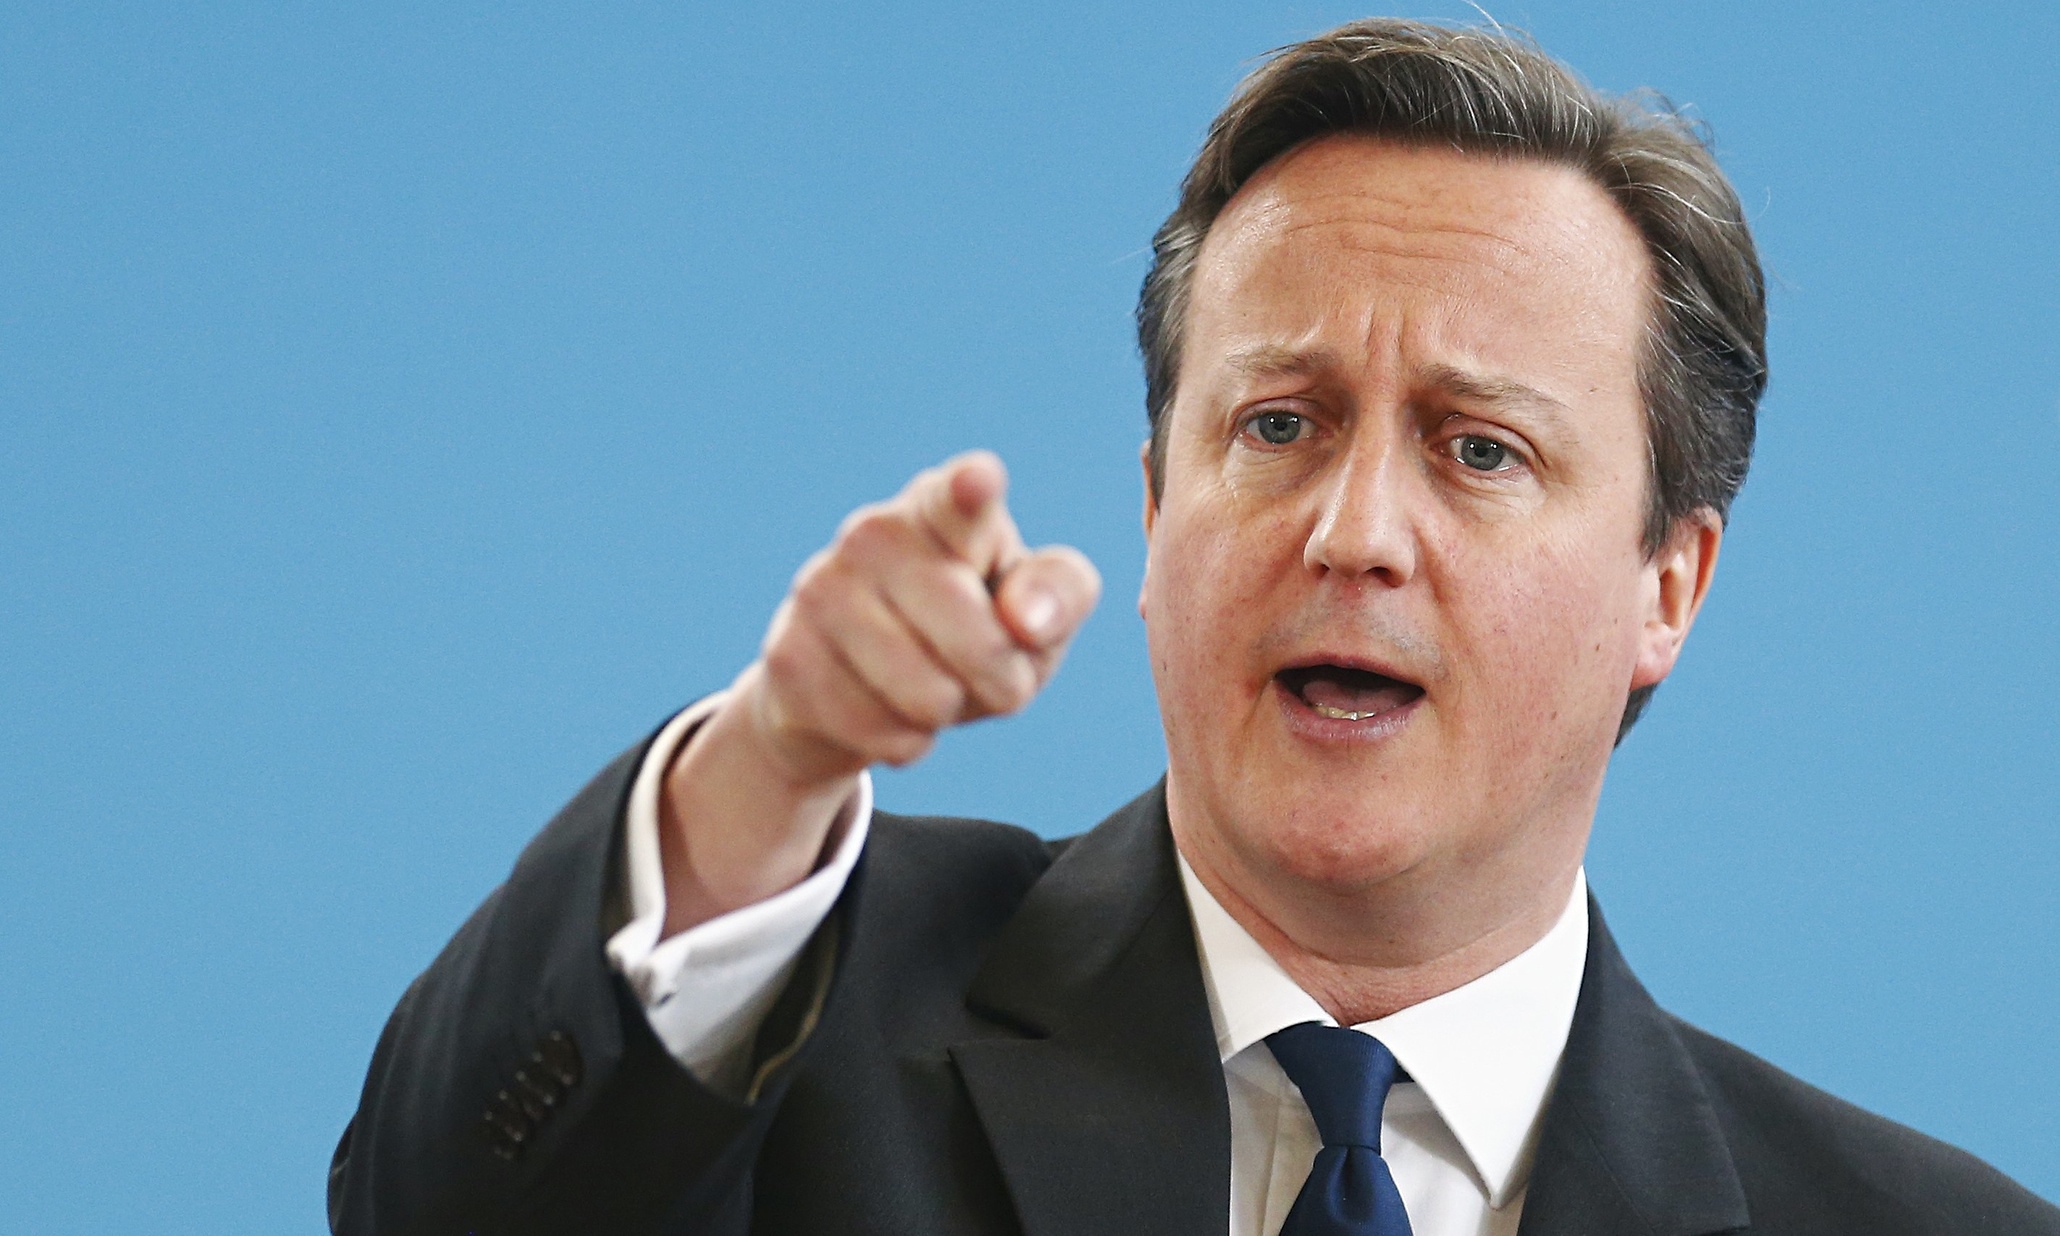 CAMERON TALKS ABOUT CORRUPTION ABROAD WHILST HIS OWN PARTY IS UNDER POLICE INVESTIGATION